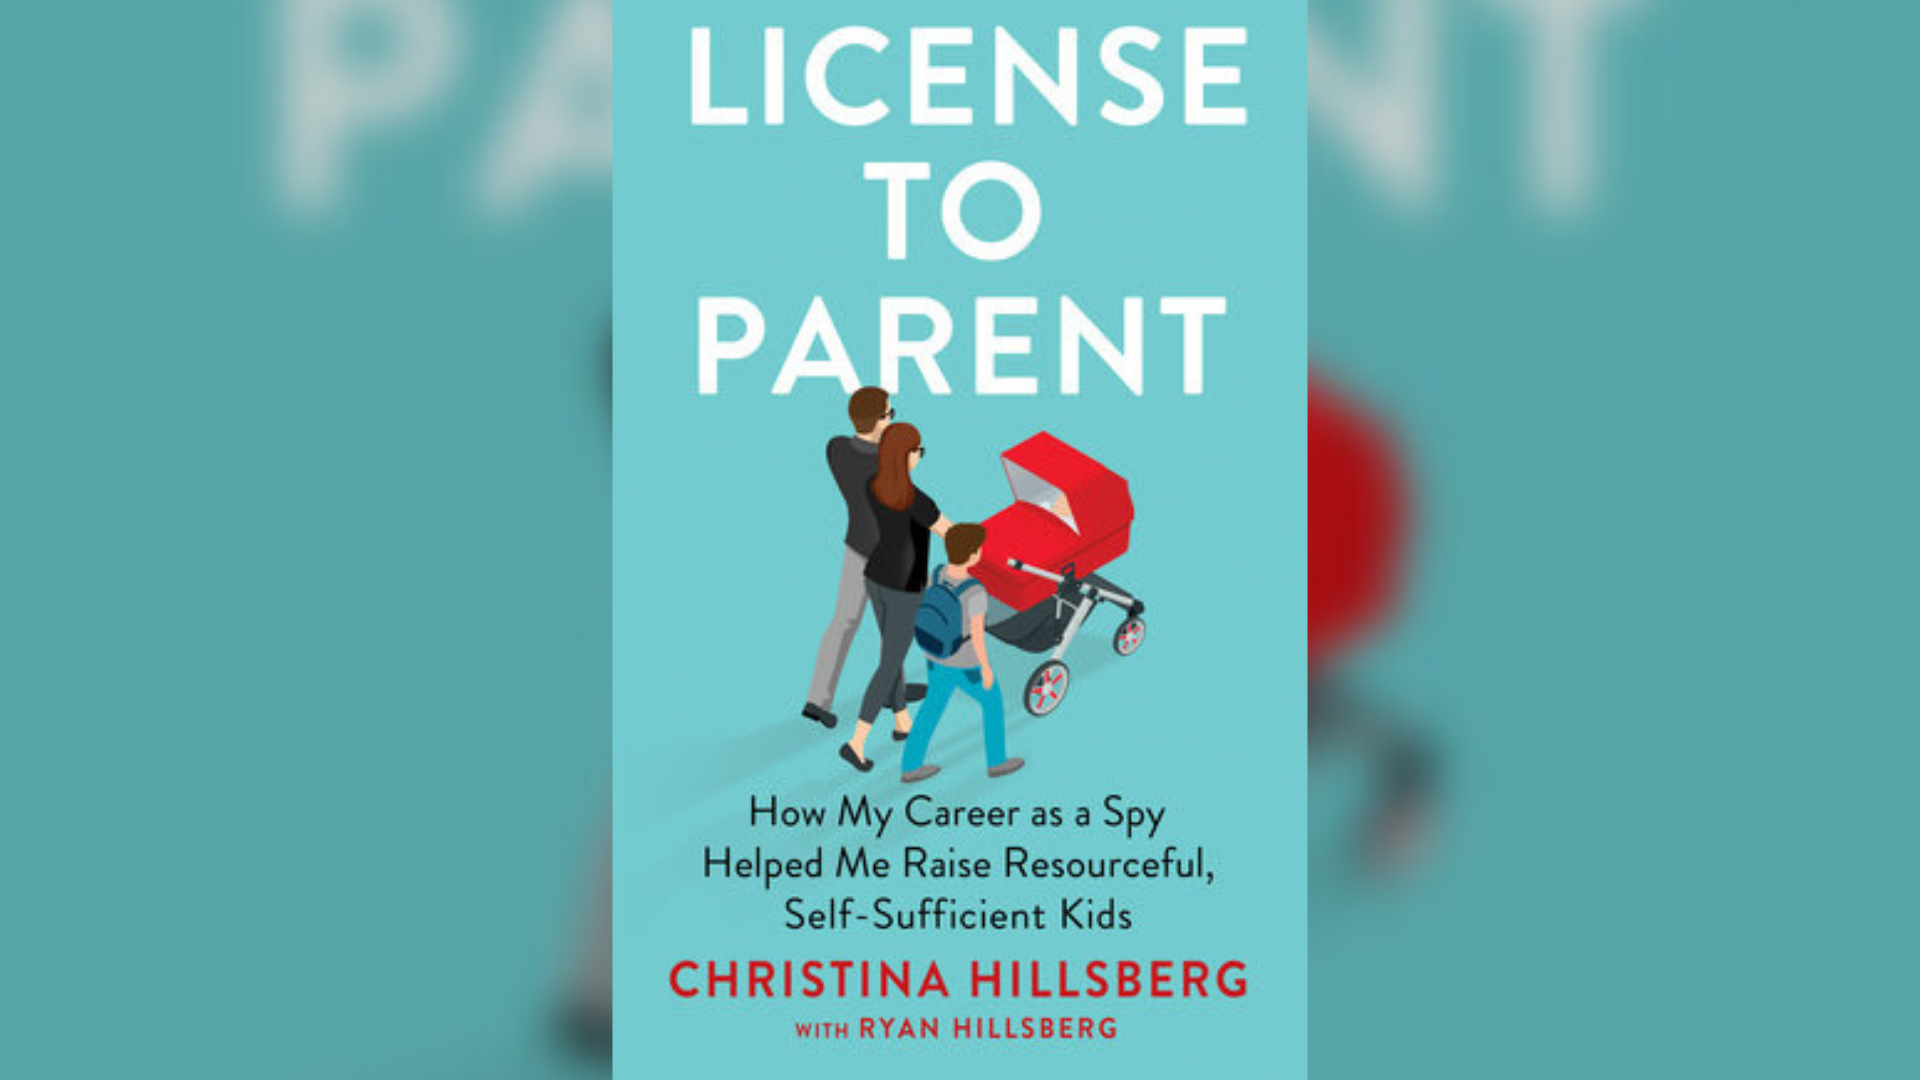 Former CIA agent Christina Hillsberg, shares how skills she learned as a spy can help when raising kids. "License to Parent" is out now. #newdaynw